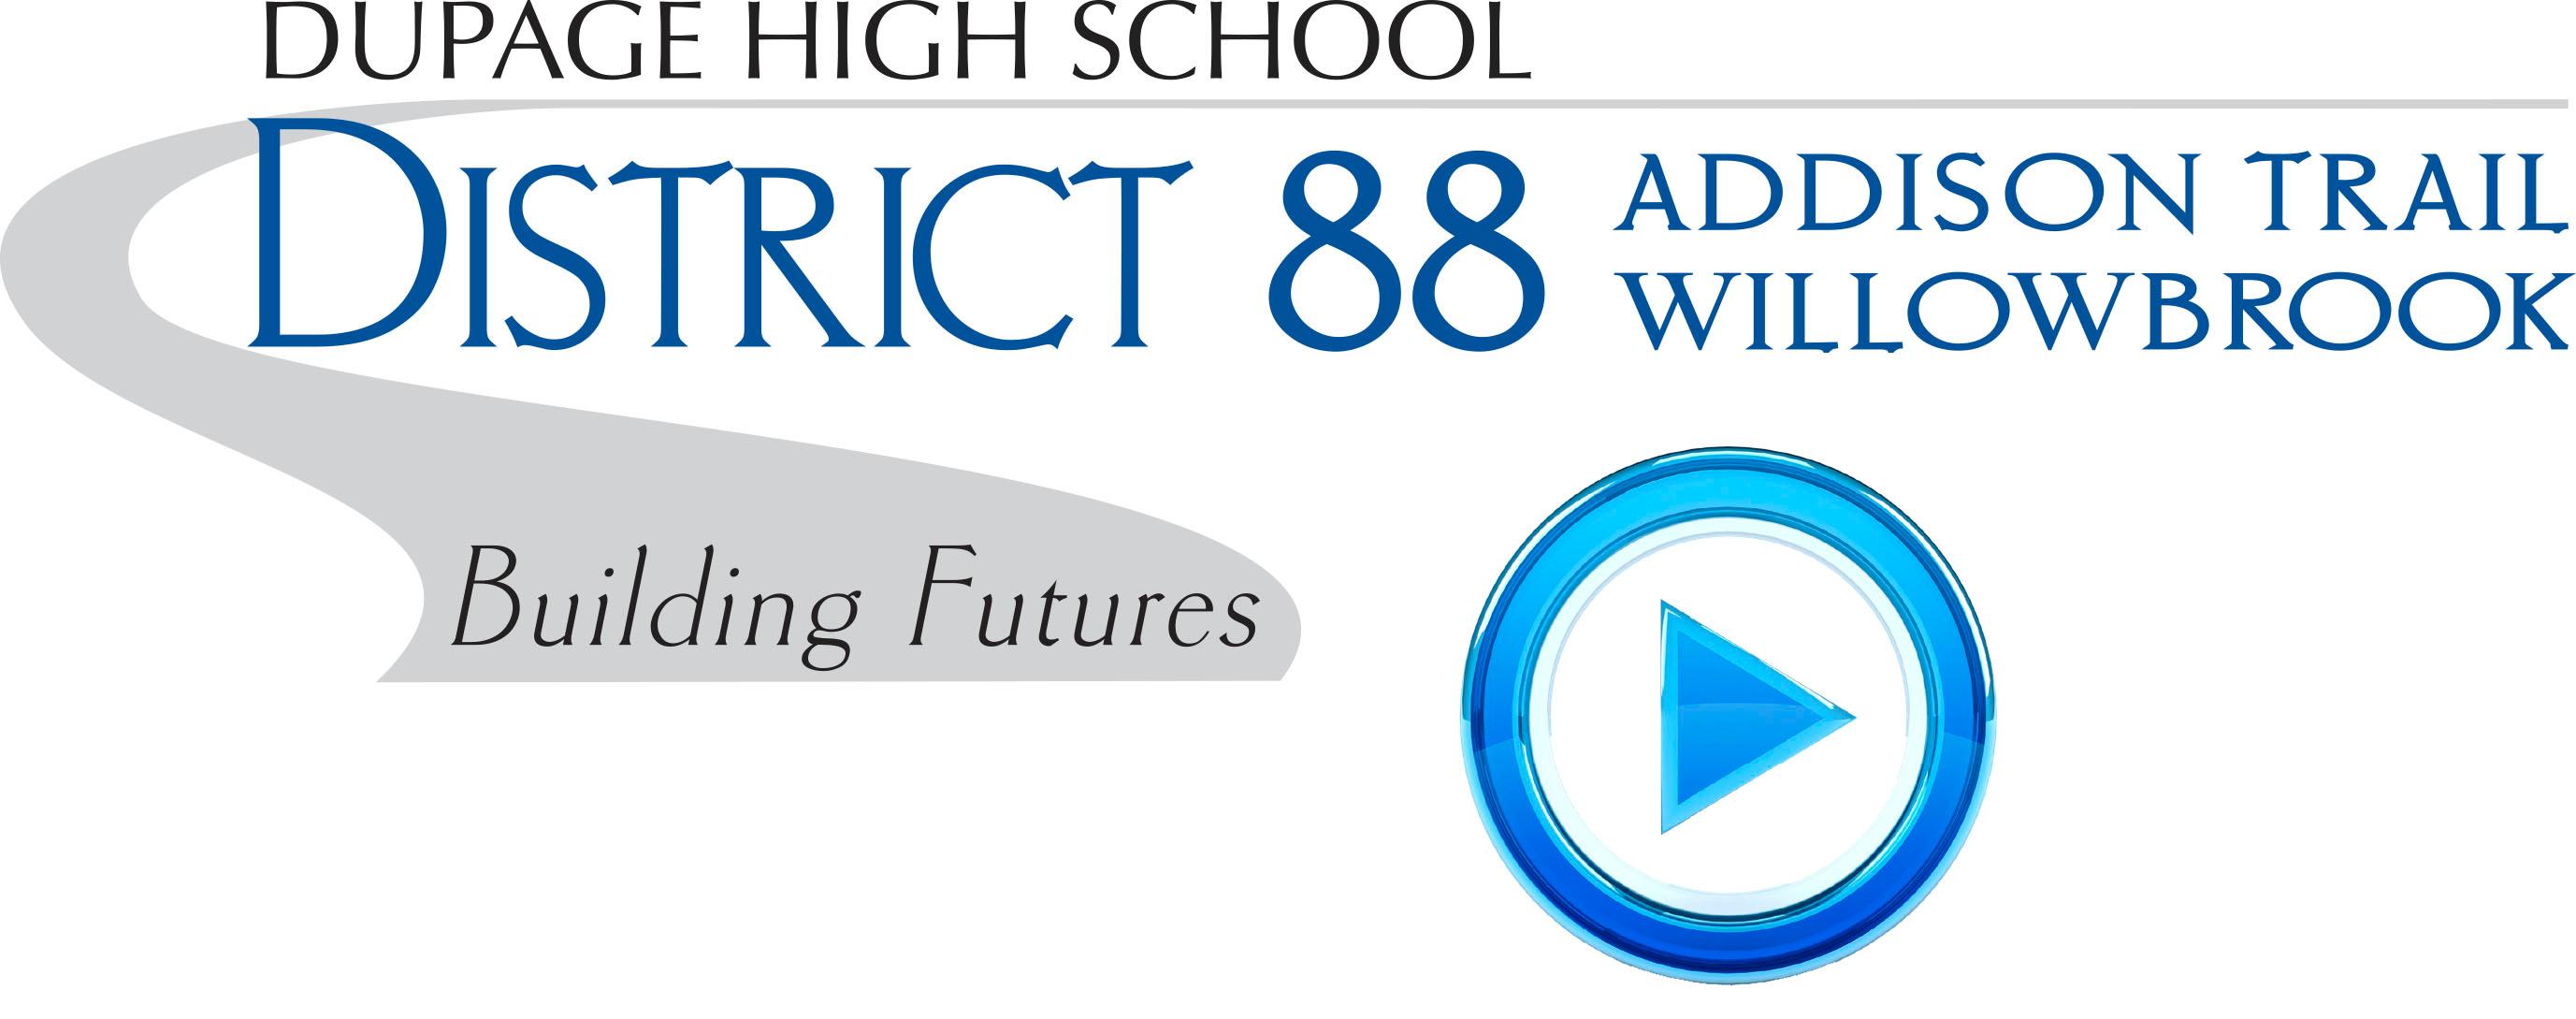 District 88 shares important COVID-19 updates and reminders